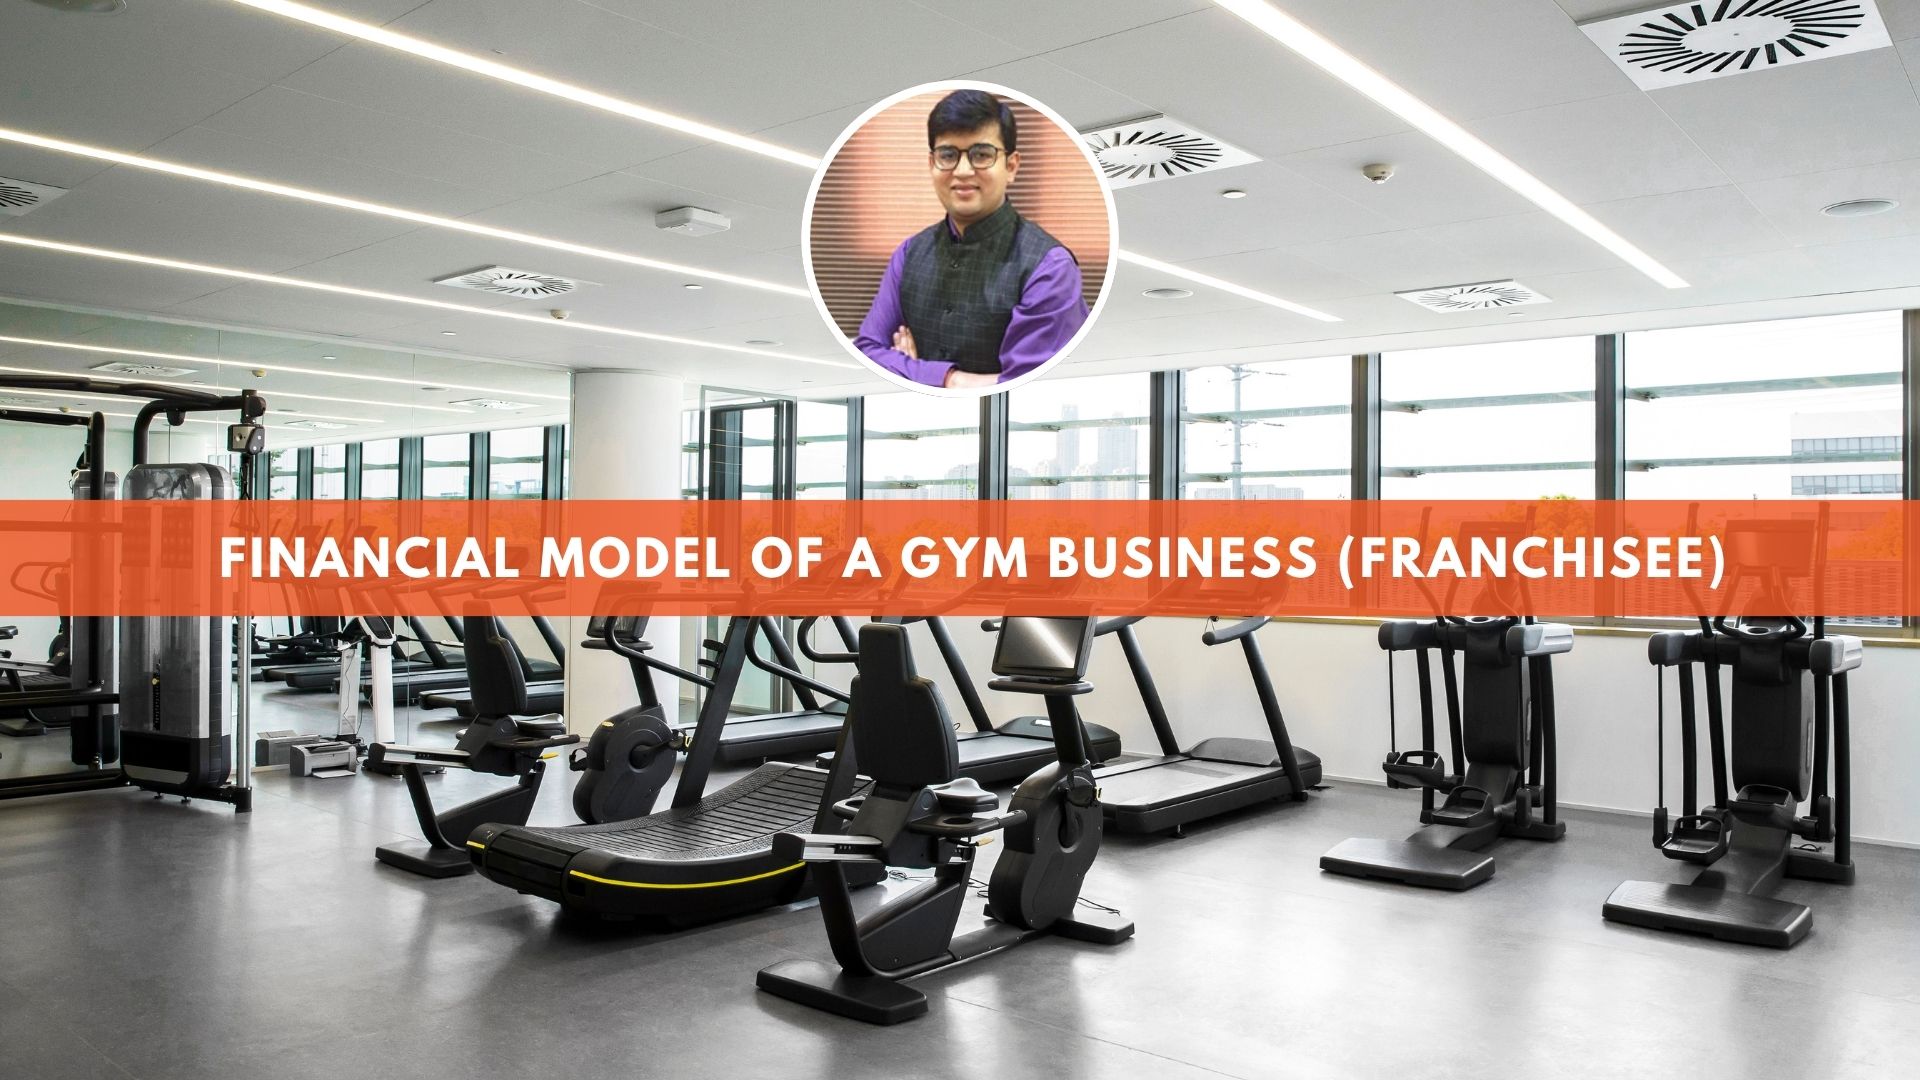 Financial Model of a Gym Business (Franchisee)